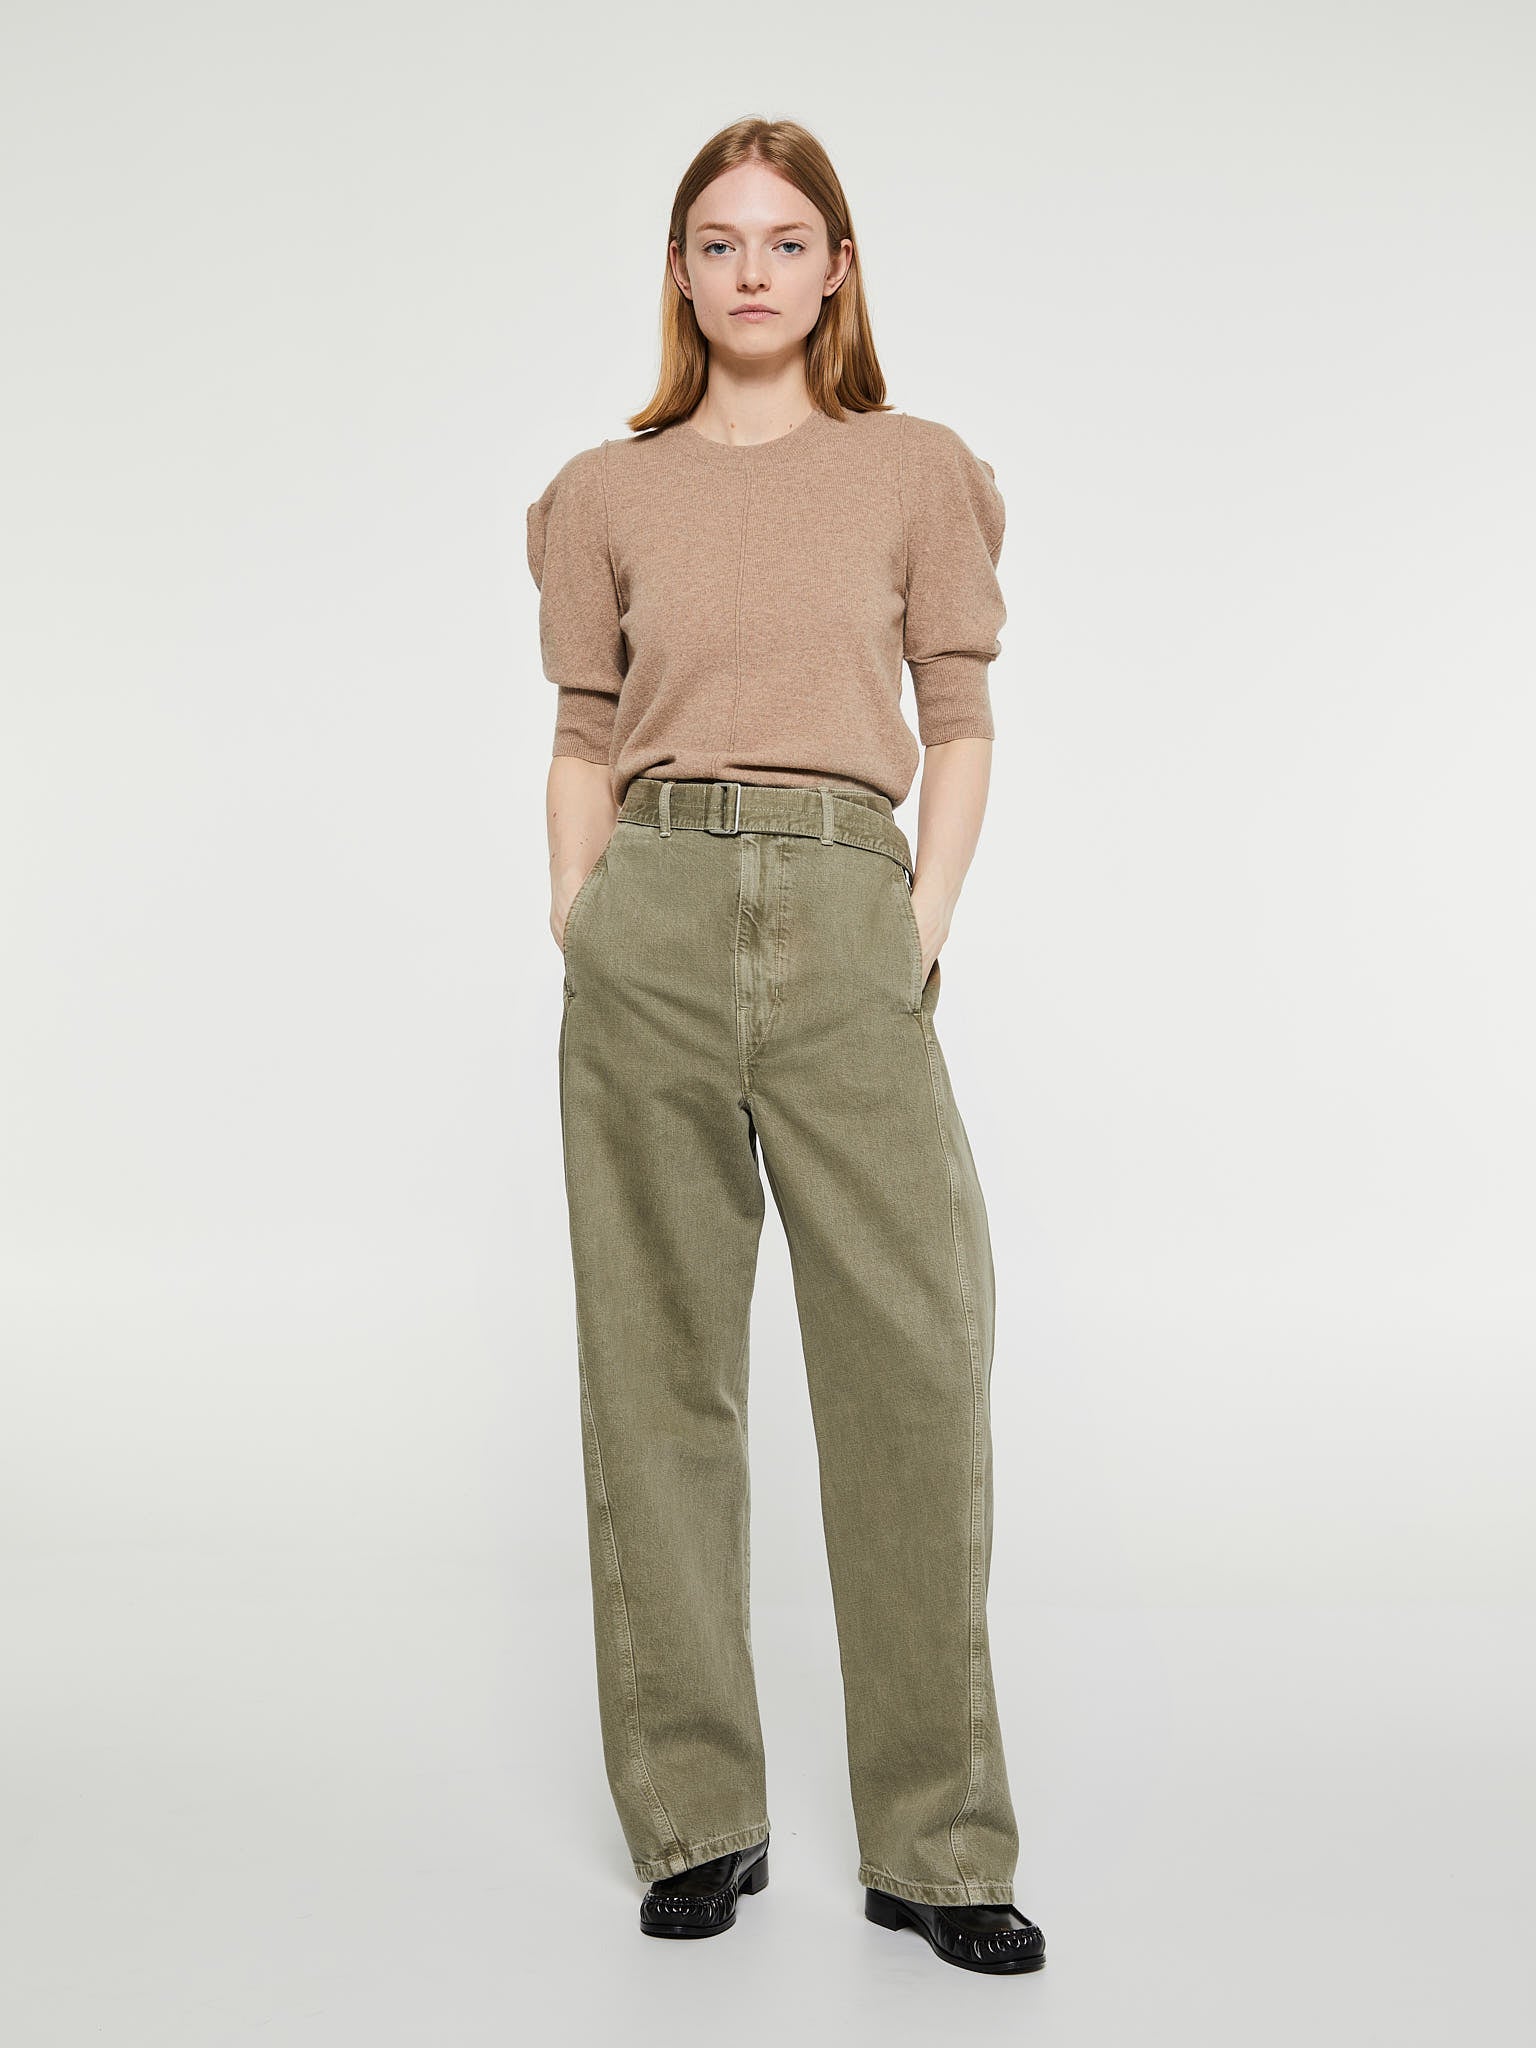 Twisted Belted Pants in Olive